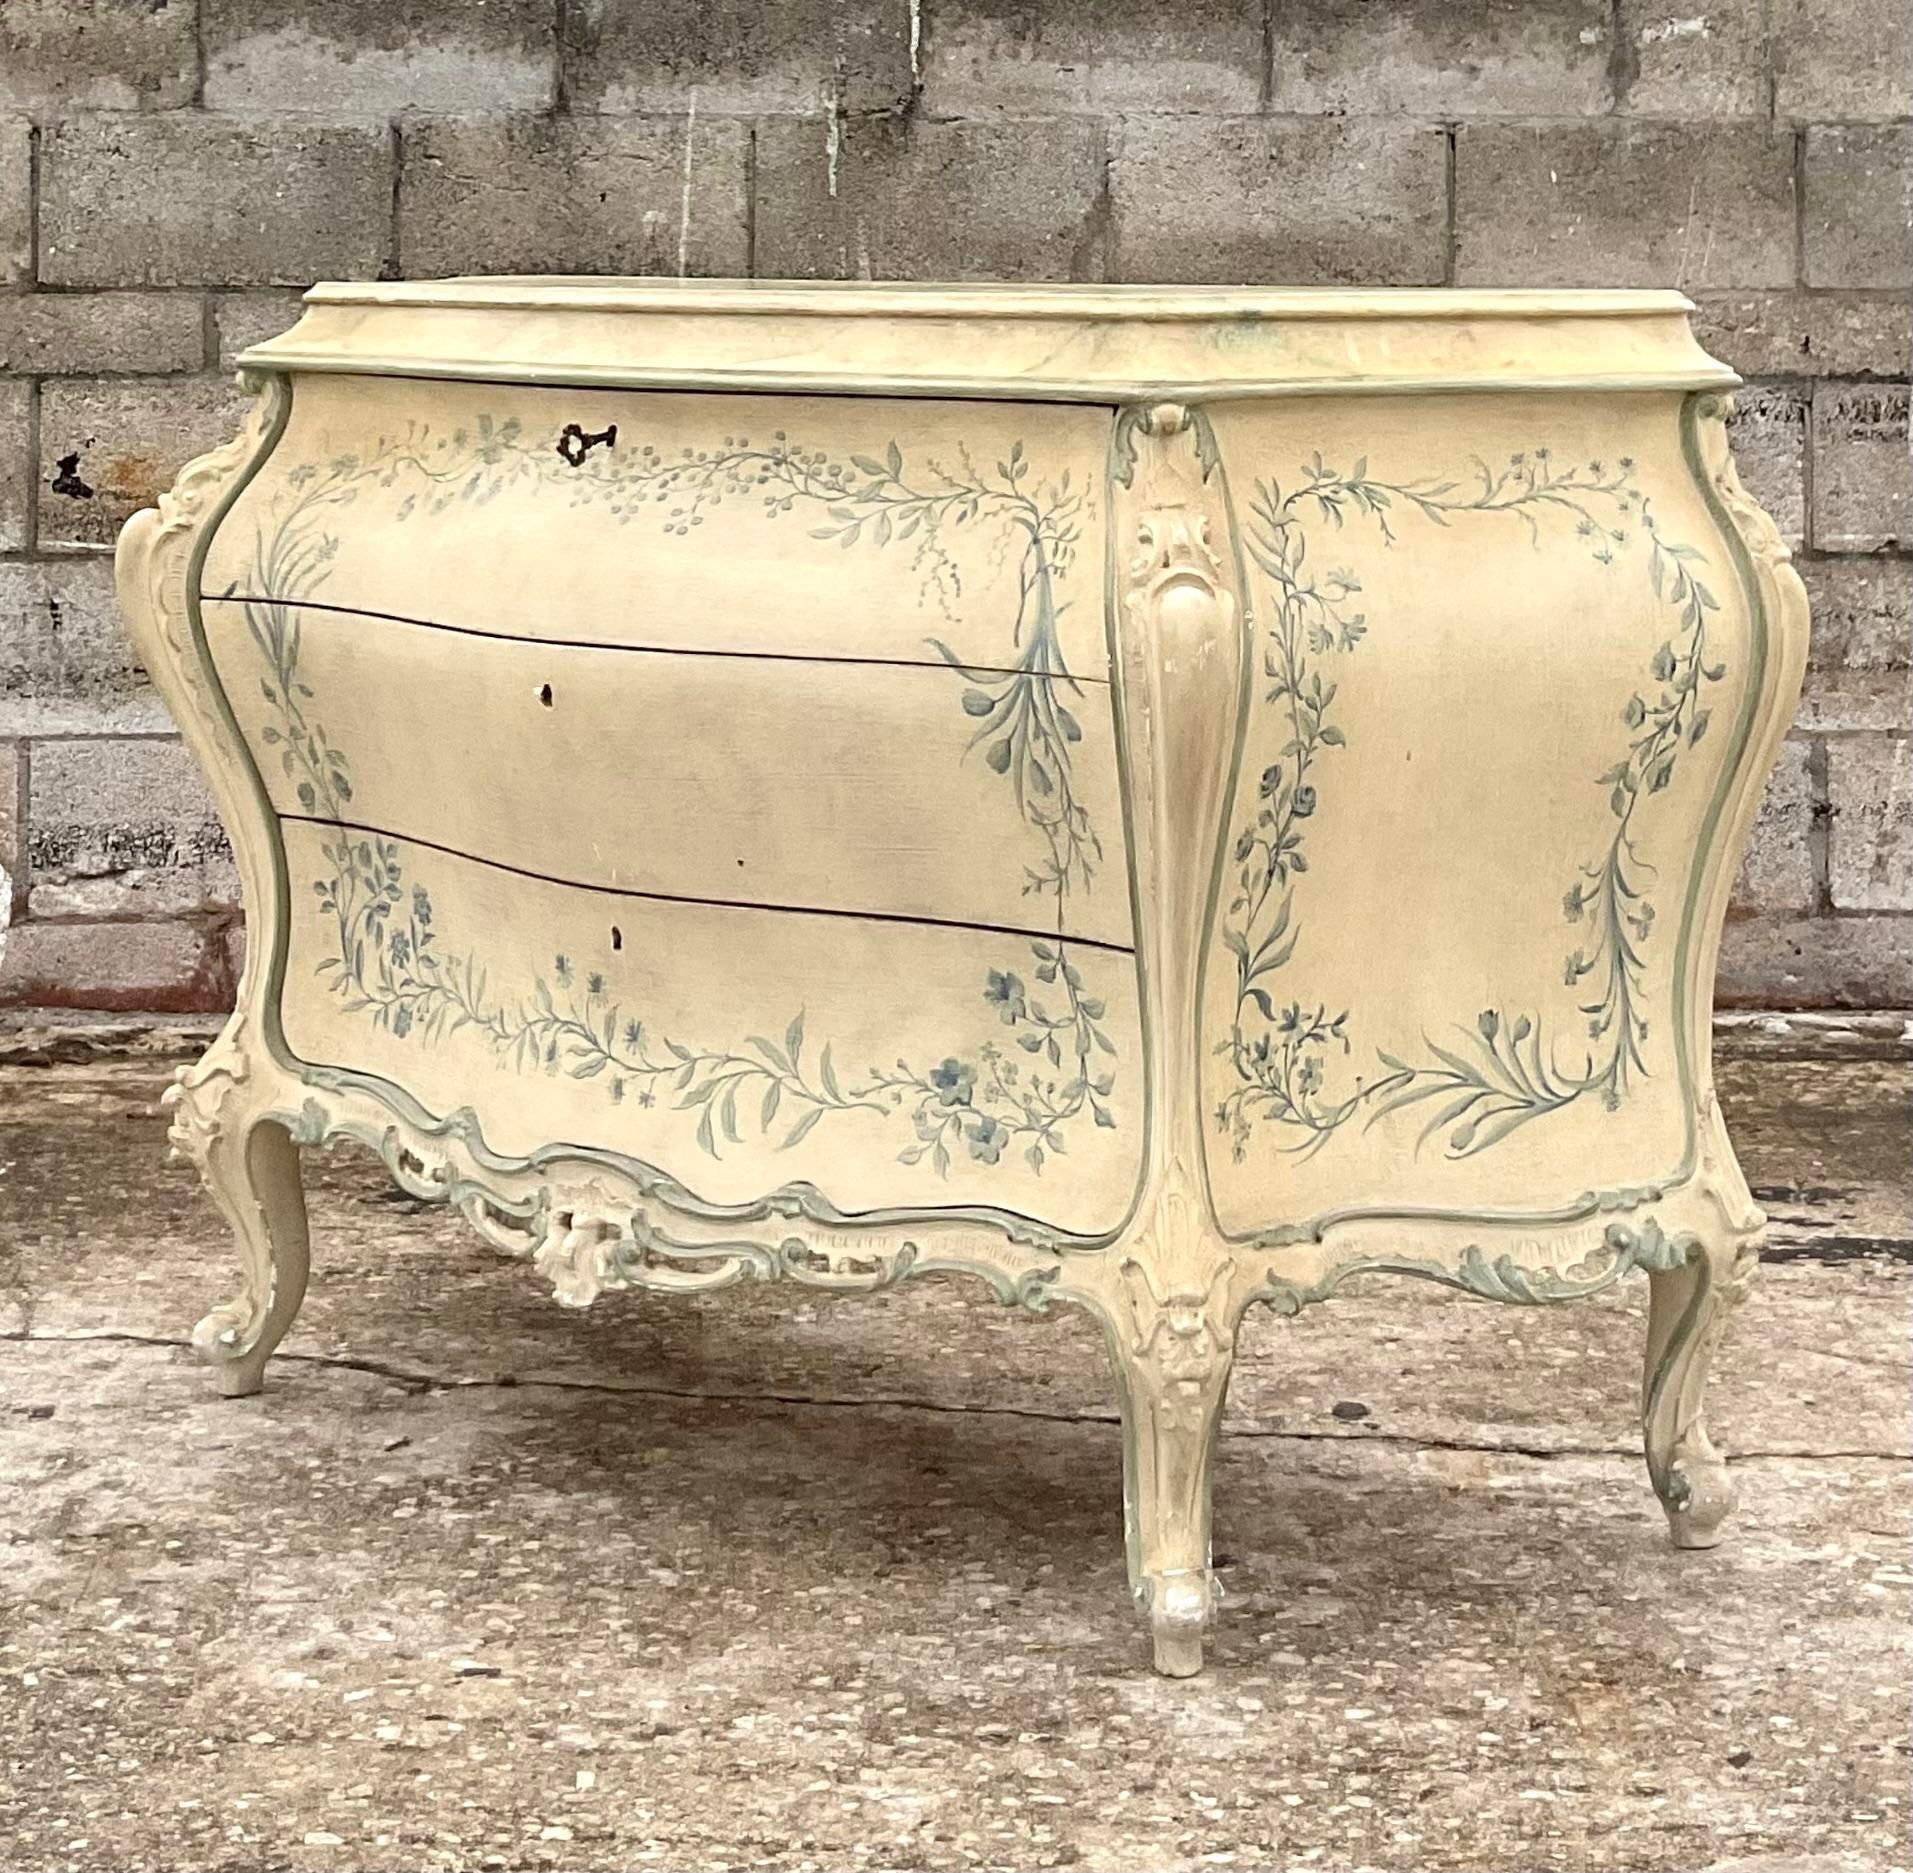 North American Vintage Parisian Chic Hand Painted Bombe Chest